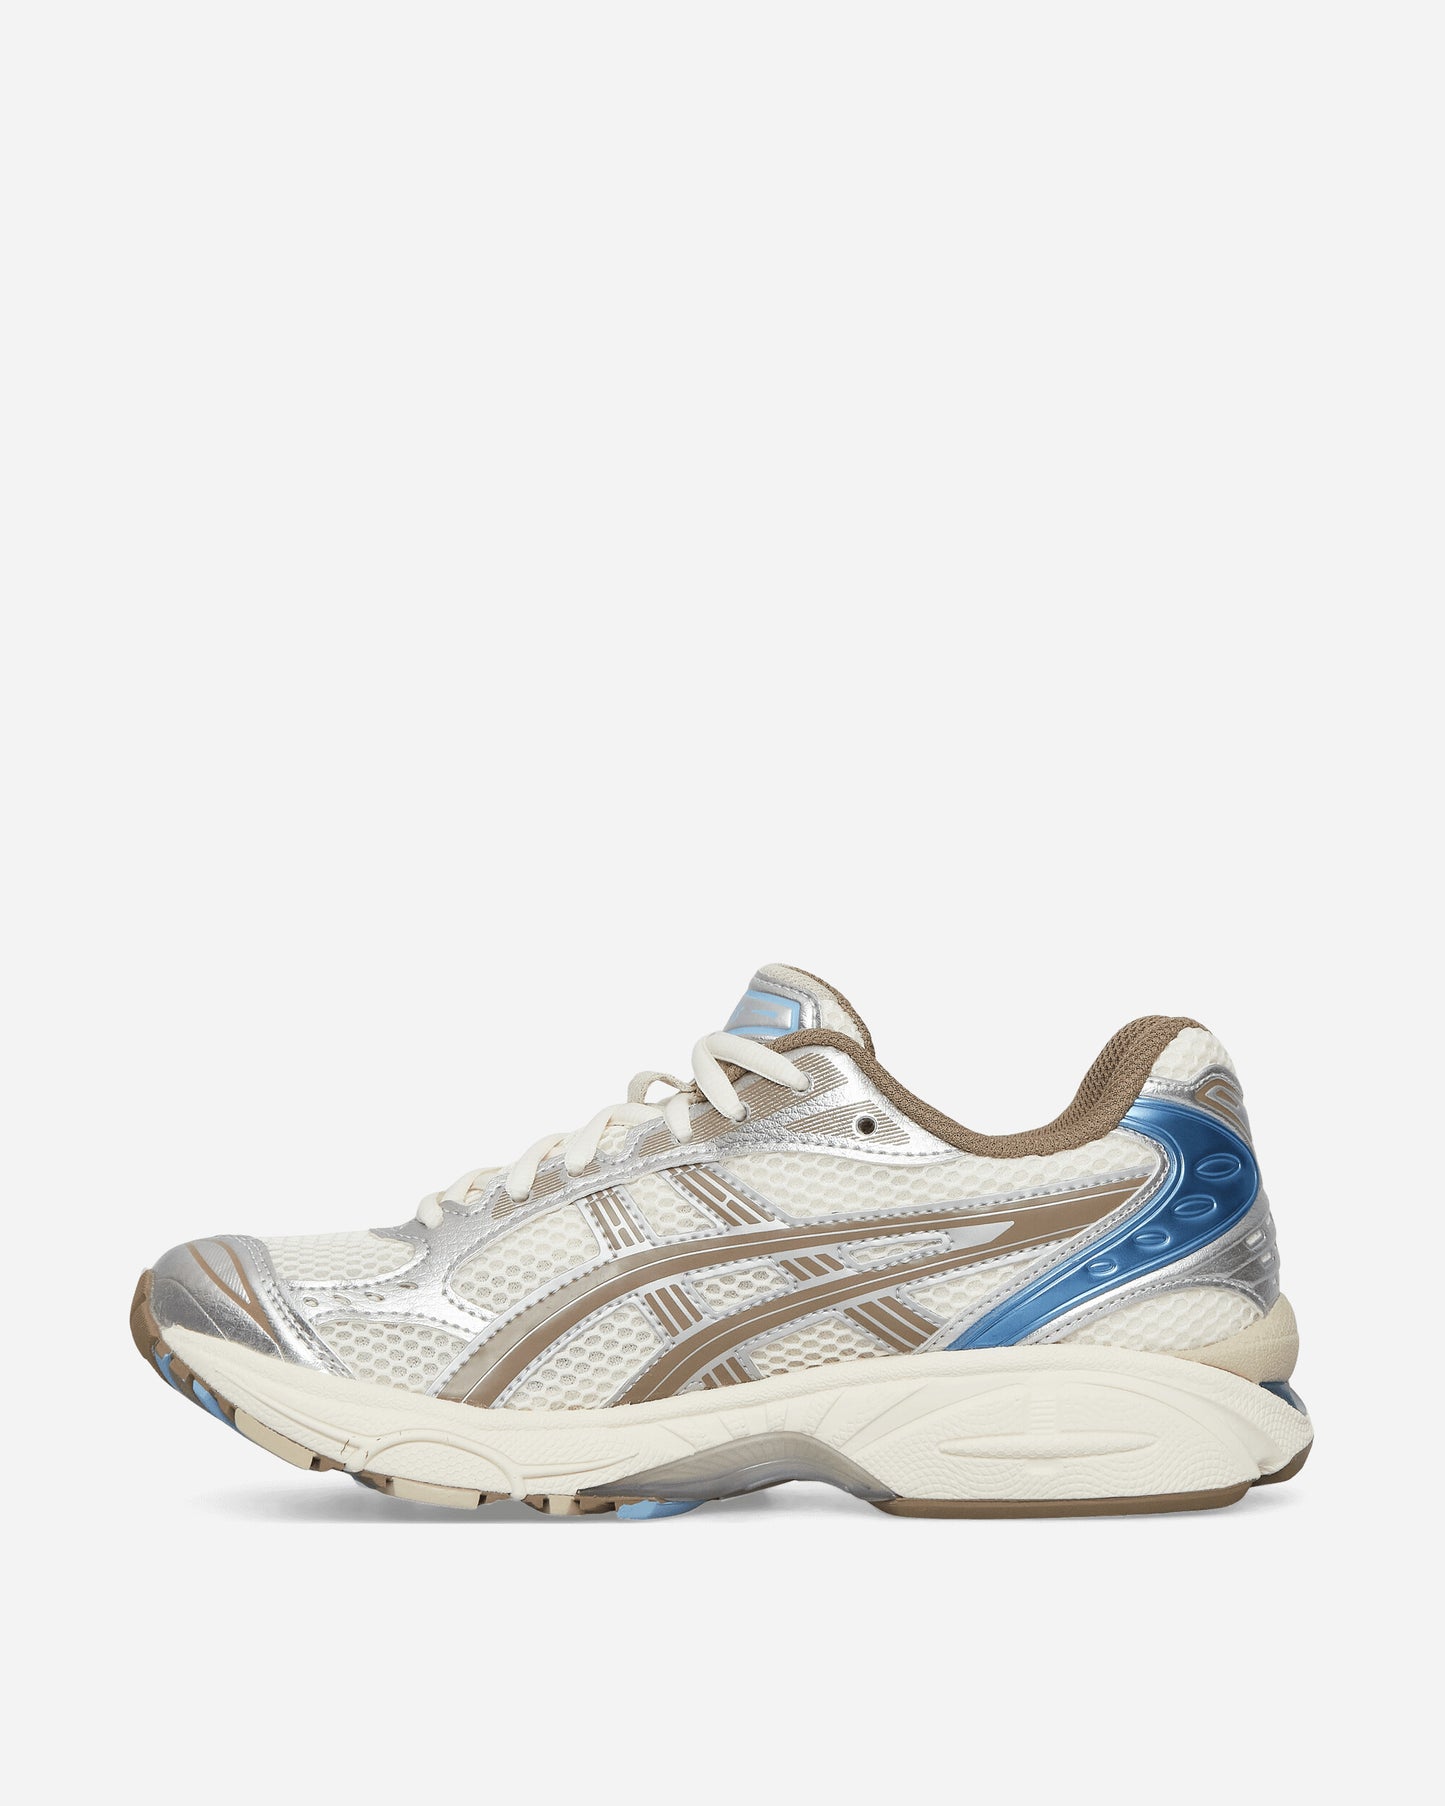 Asics Wmns Gel-Kayano 14 Cream/Pepper Sneakers Low 1202A056-113